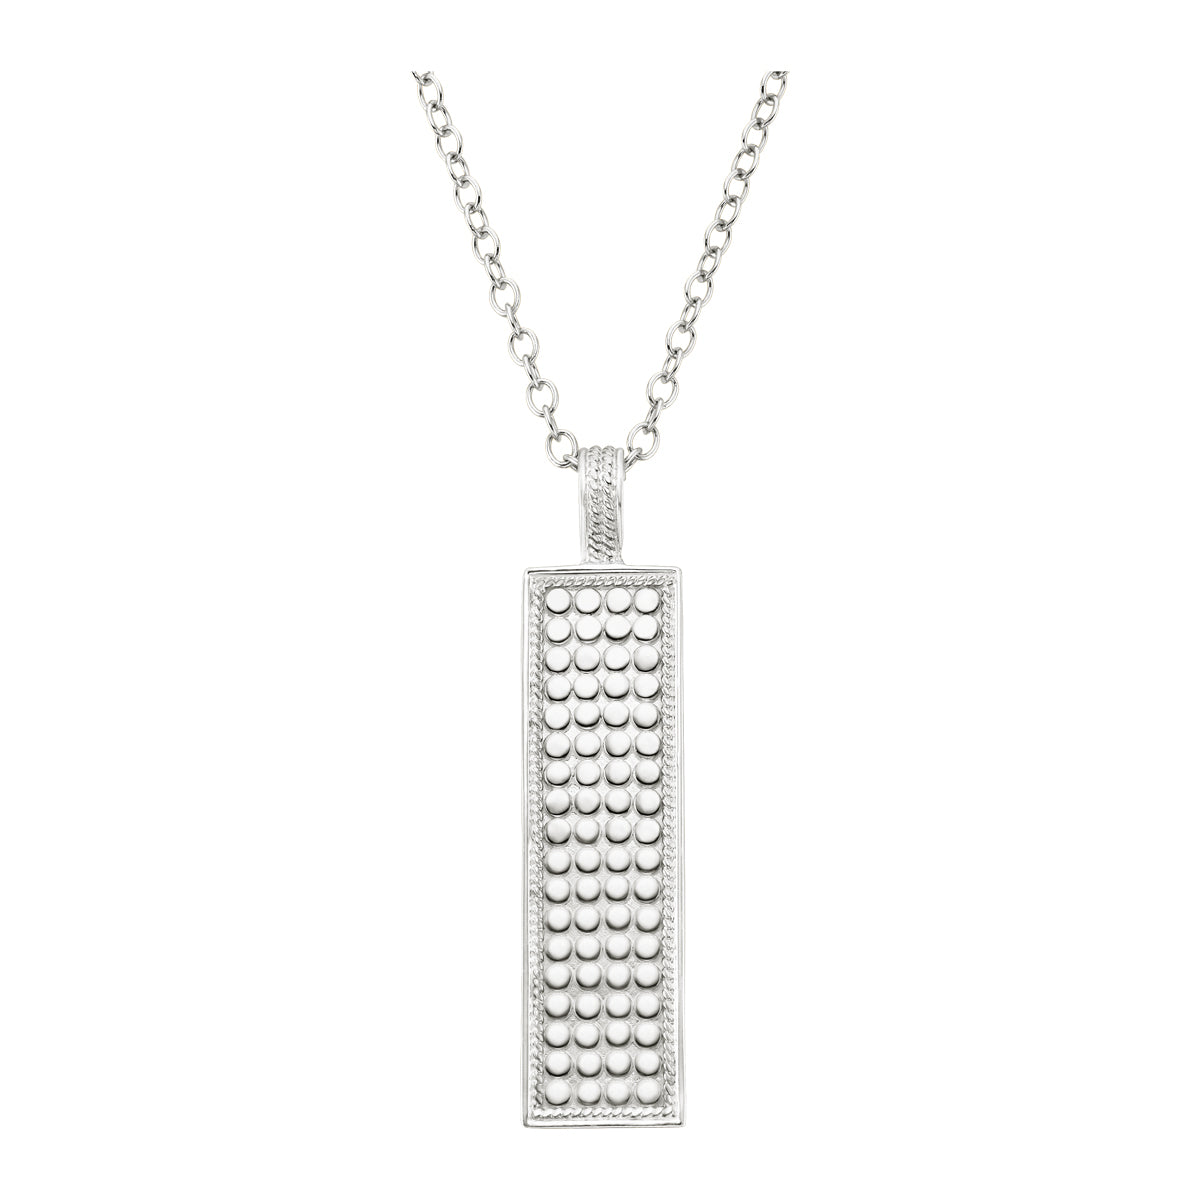 Ana Beck Sterling Silver Bar Pendant Necklace - Silver